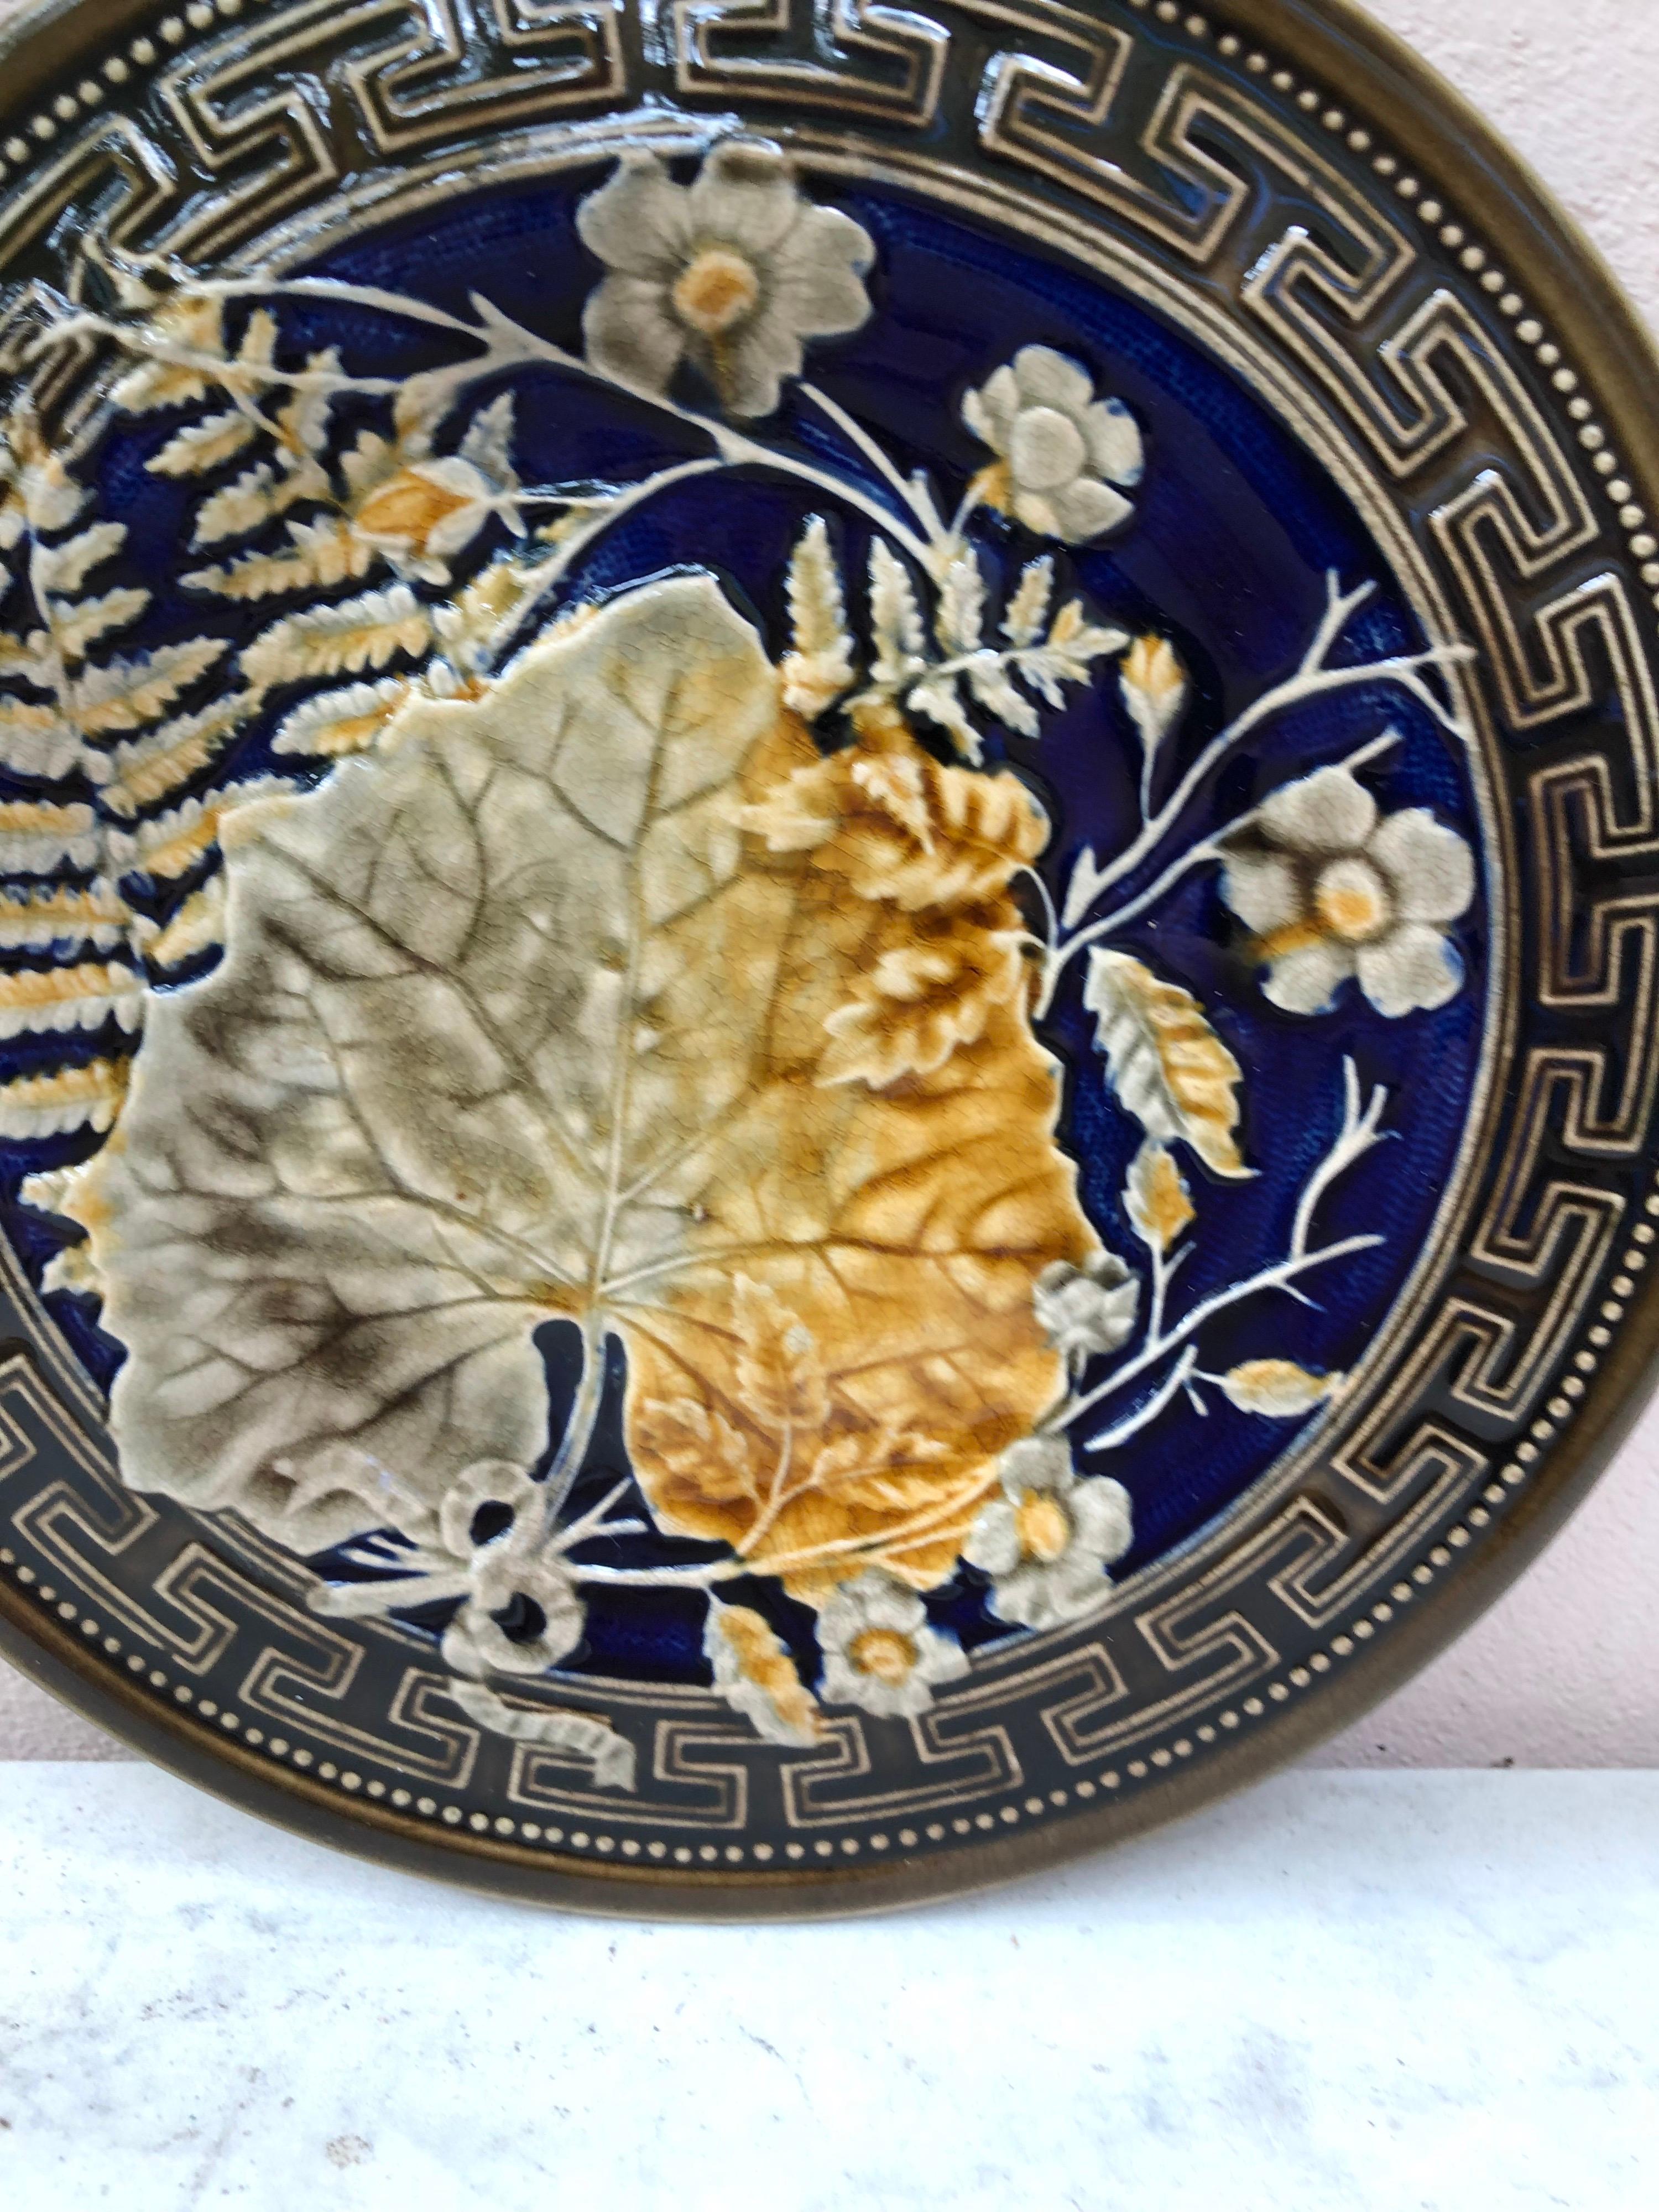 Majolica plate signed Choisy le roi, circa 1890.
Decorated with leaves, ferns, pink flowers and Greek border.
Very rare colors.